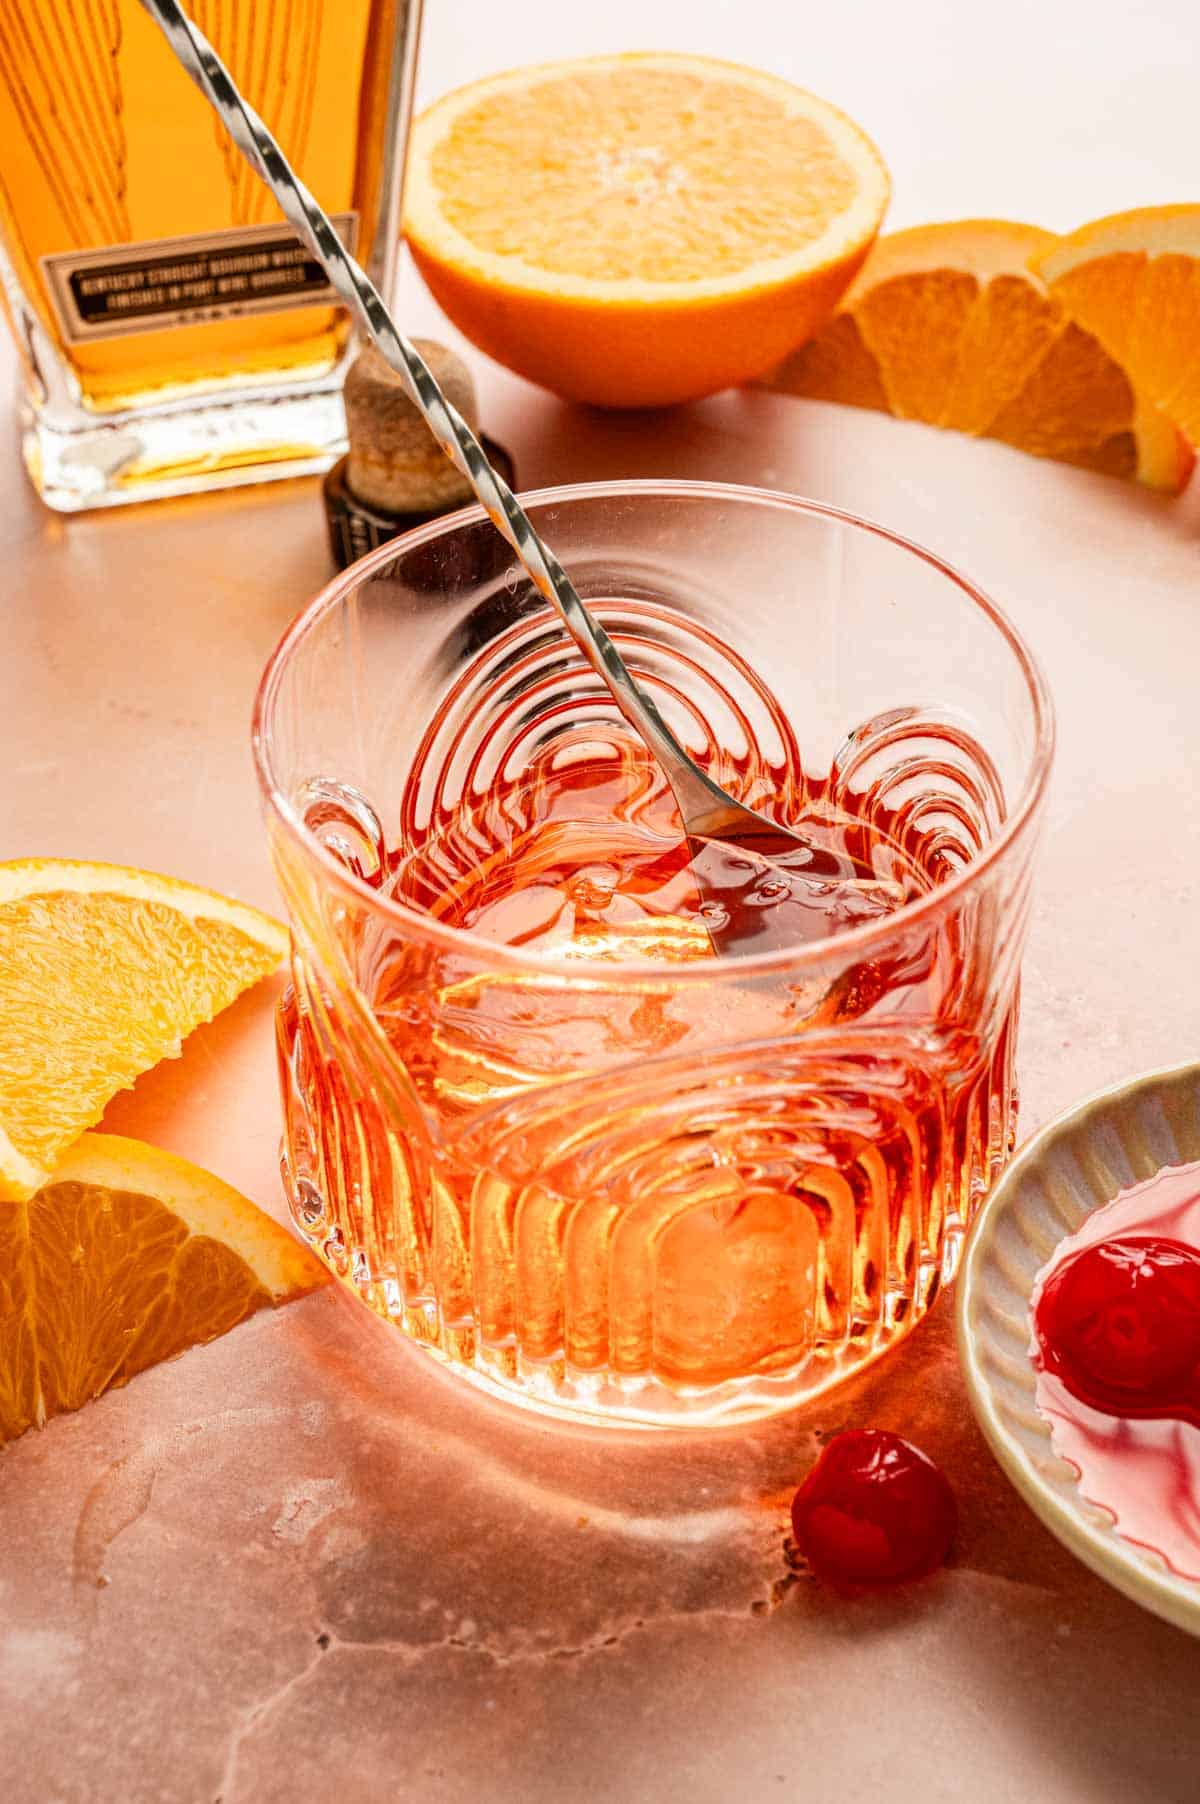 A cocktail stirrer is stirring the drink.